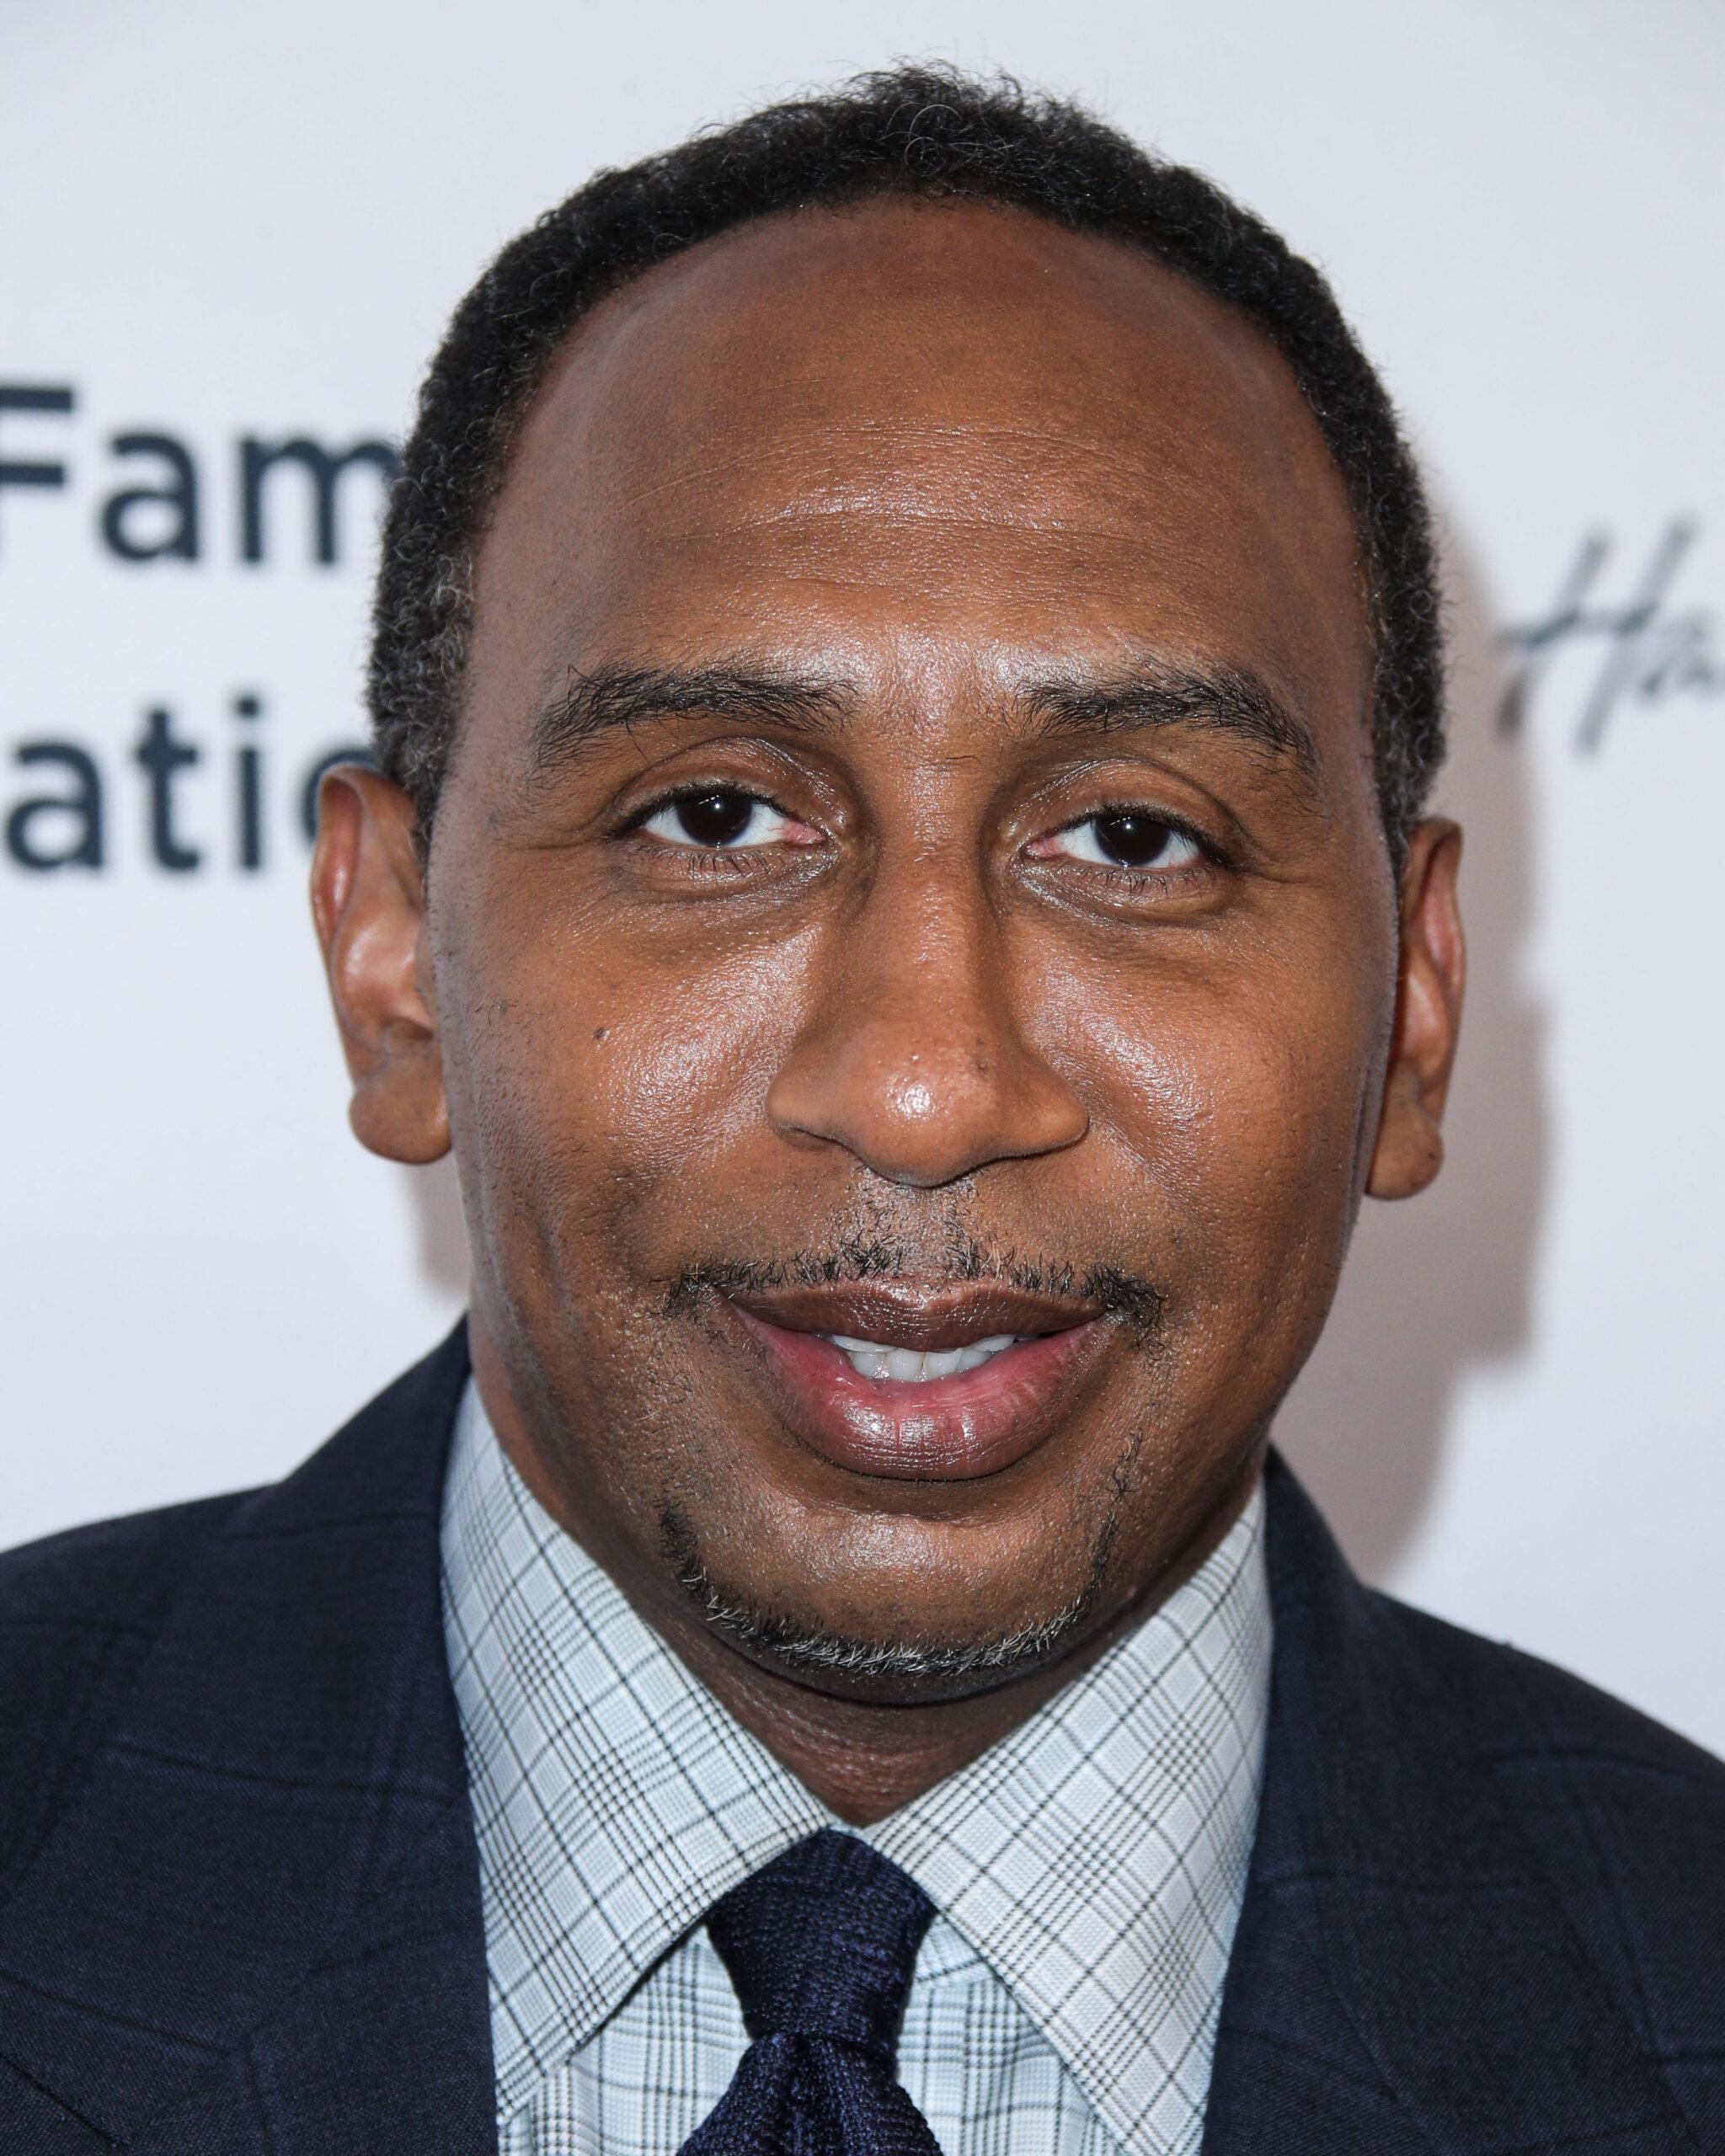 Stephen A. Smith in a tux